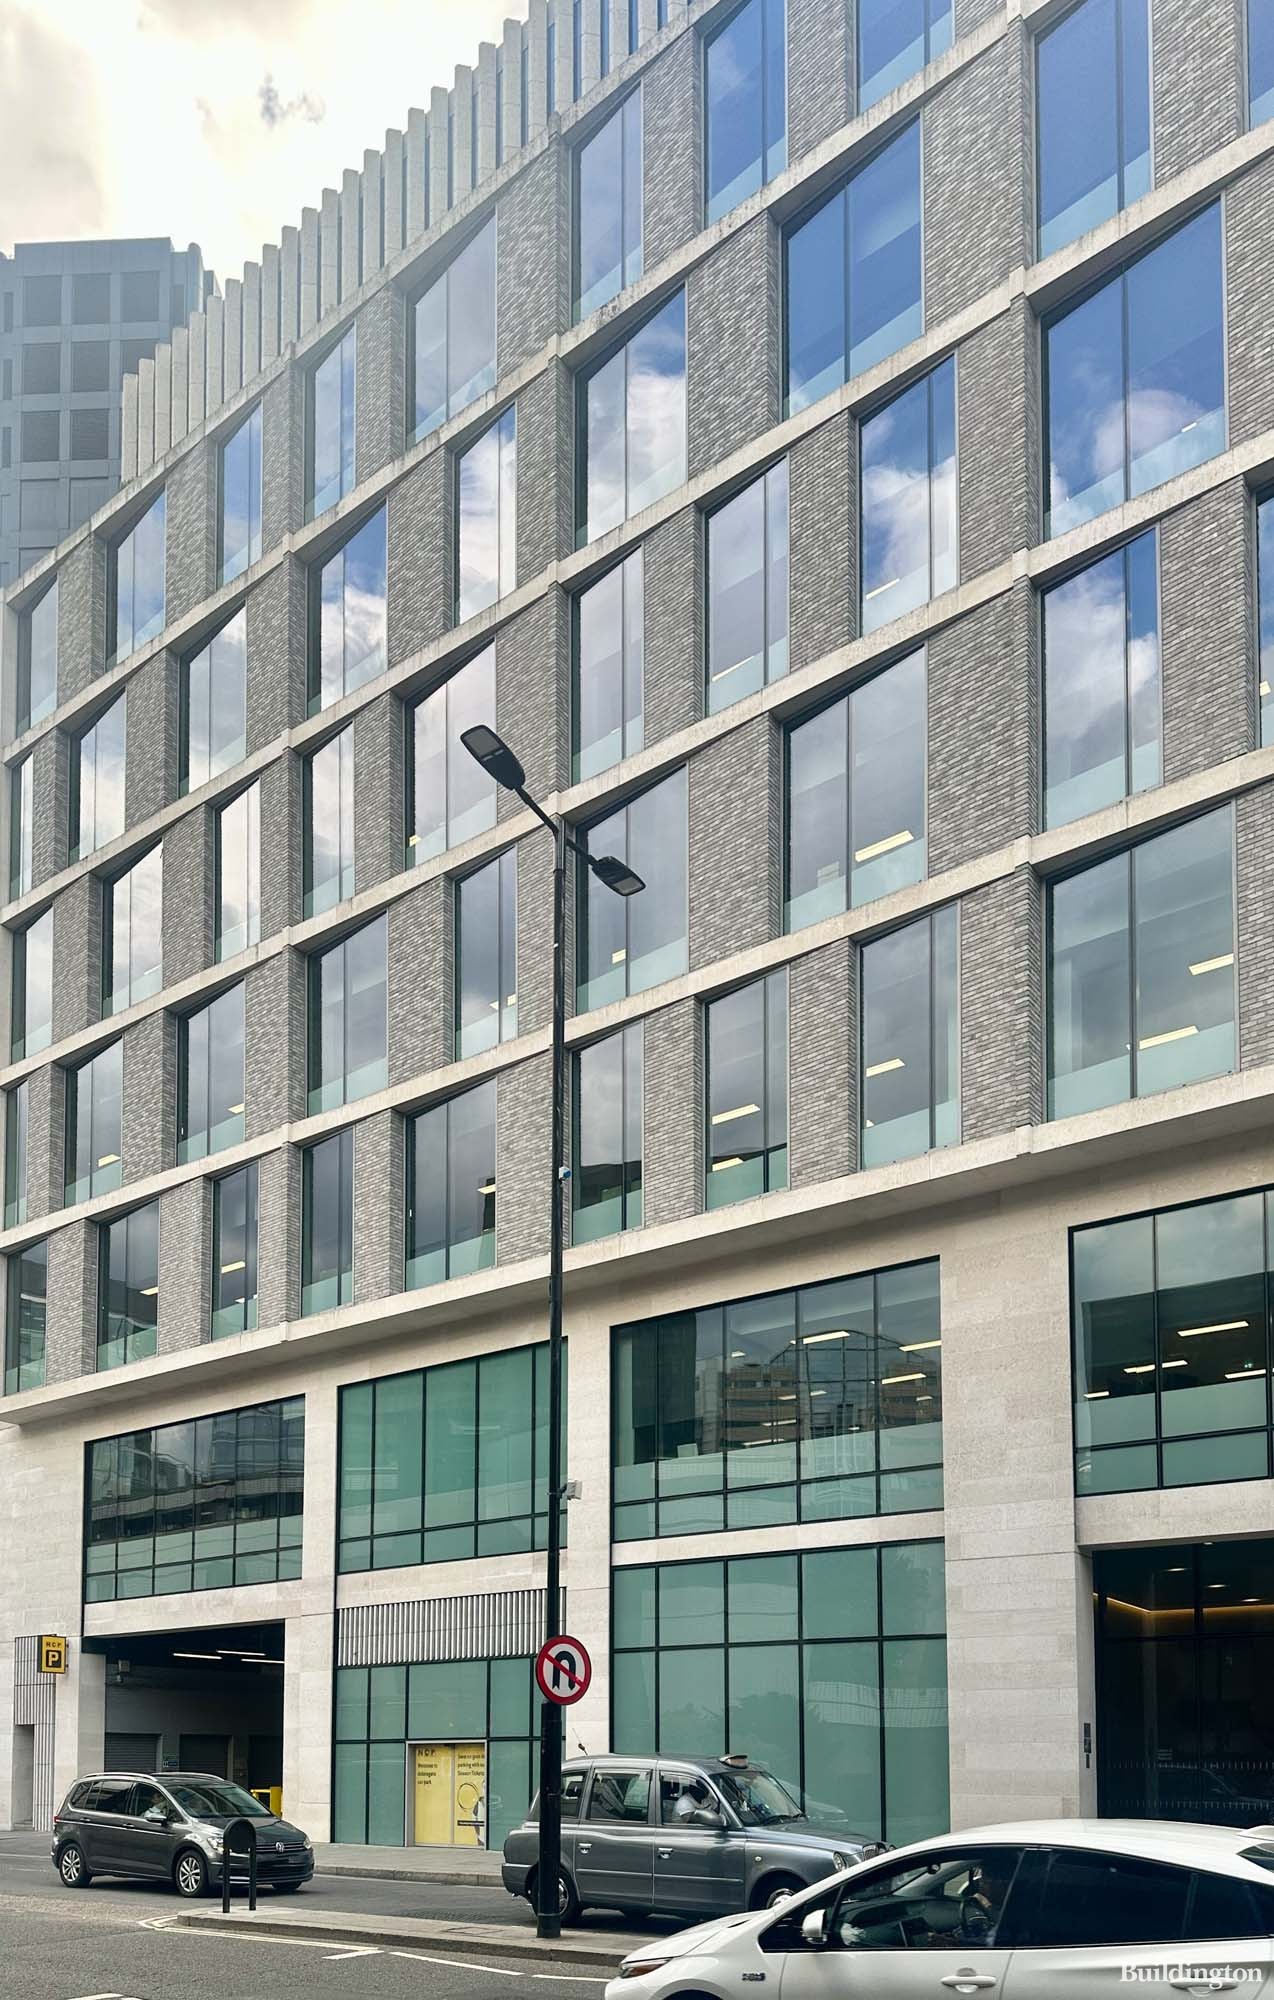 Designed by Fletcher Priest Architects - 160 Aldersgate office building opposite the Barbican Estate in the City of London EC1